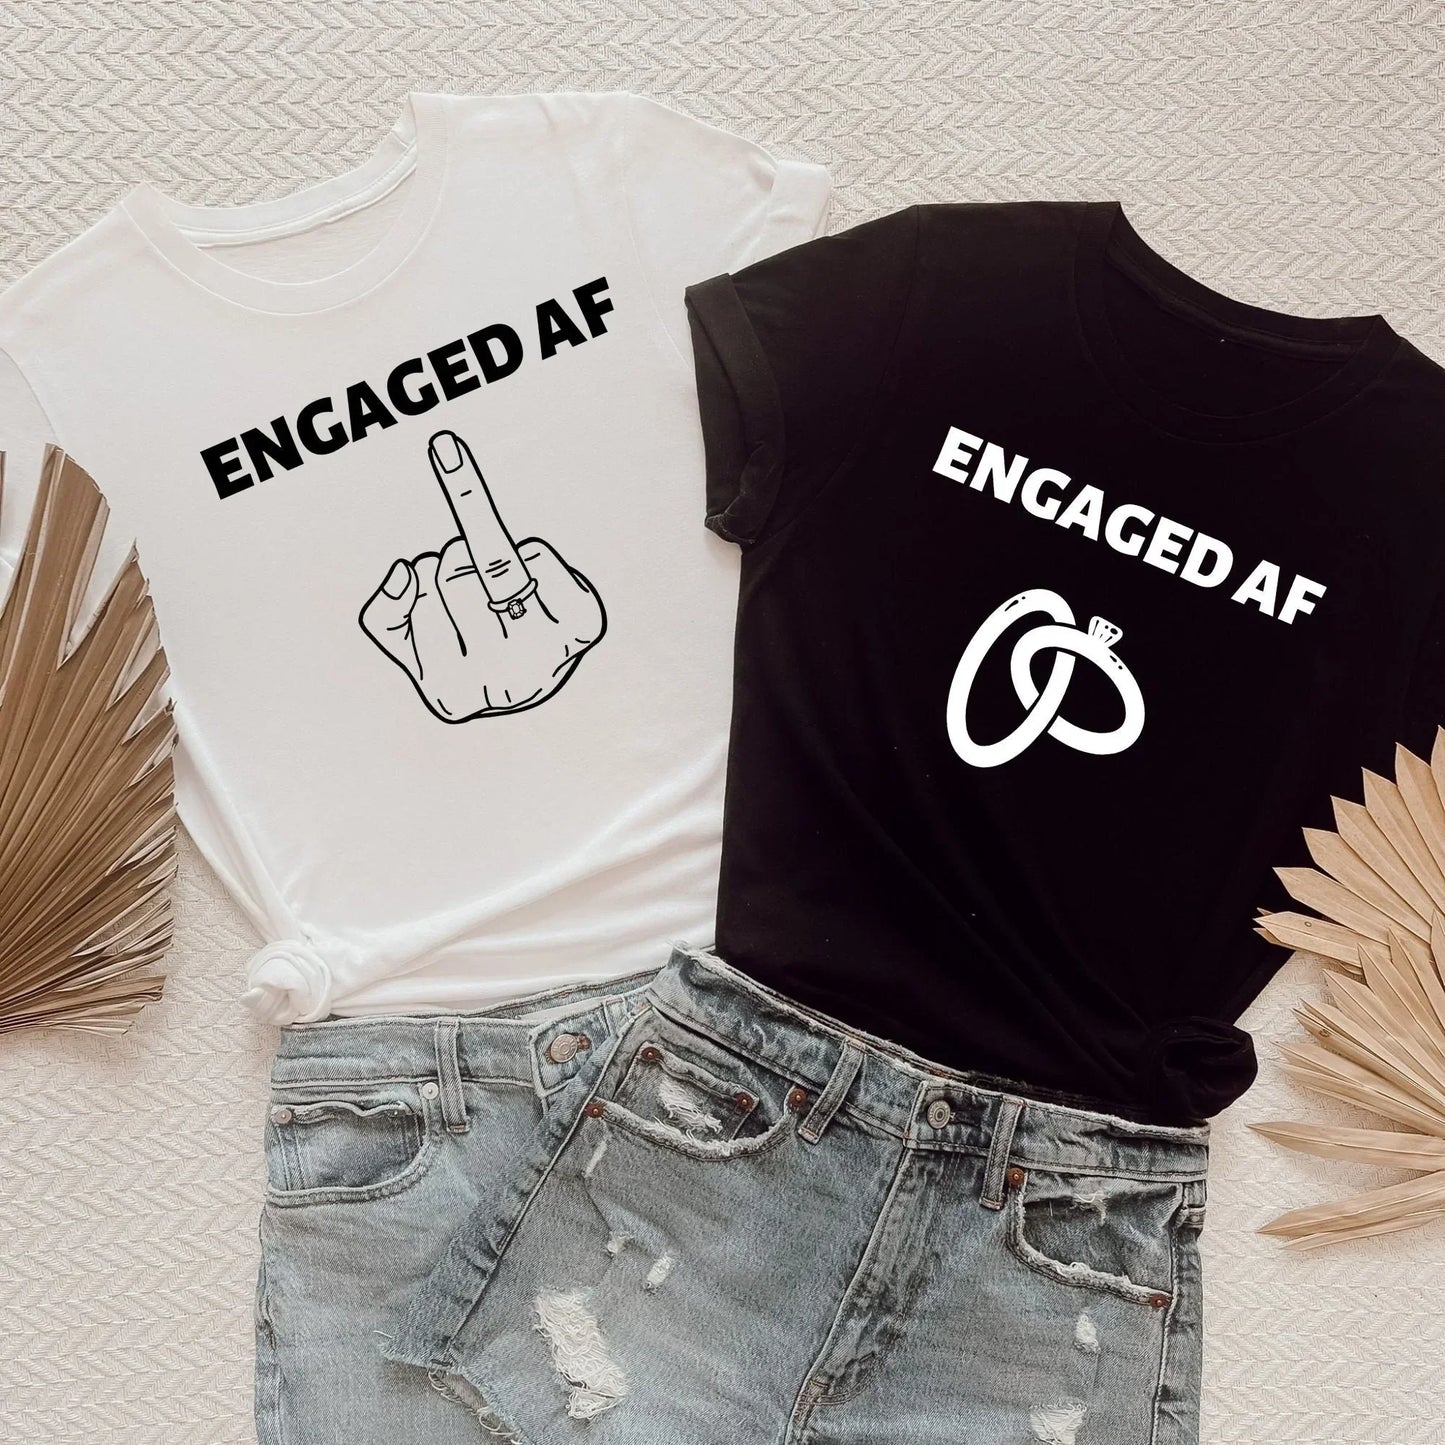 Engagement Shirt, Announcement Tee, Bachelorette Party Shirt, Bridal Shower Shirt, We're Engaged, Engaged Af Shirt, Couples Shirts HMDesignStudioUS